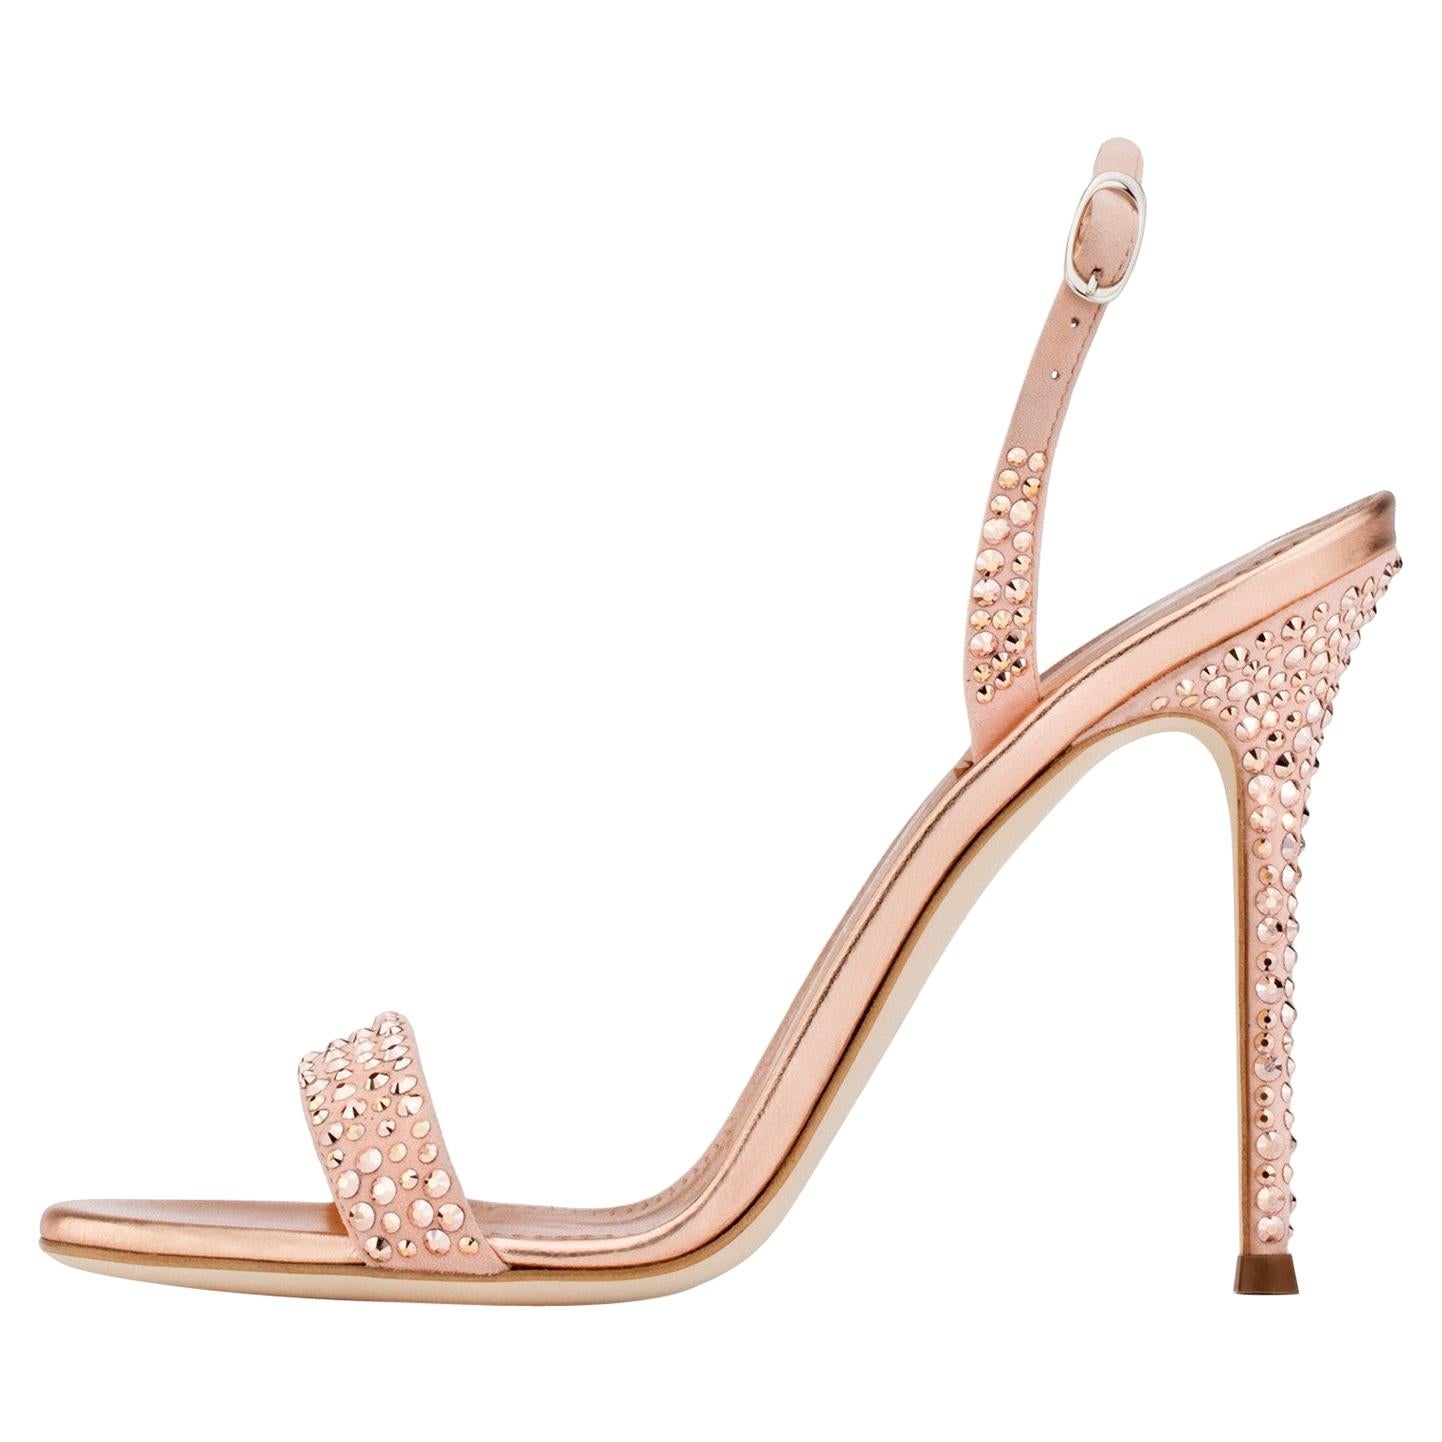 Giuseppe Zanotti NEW Pink Suede Crystal Evening Sandals Heels in Box